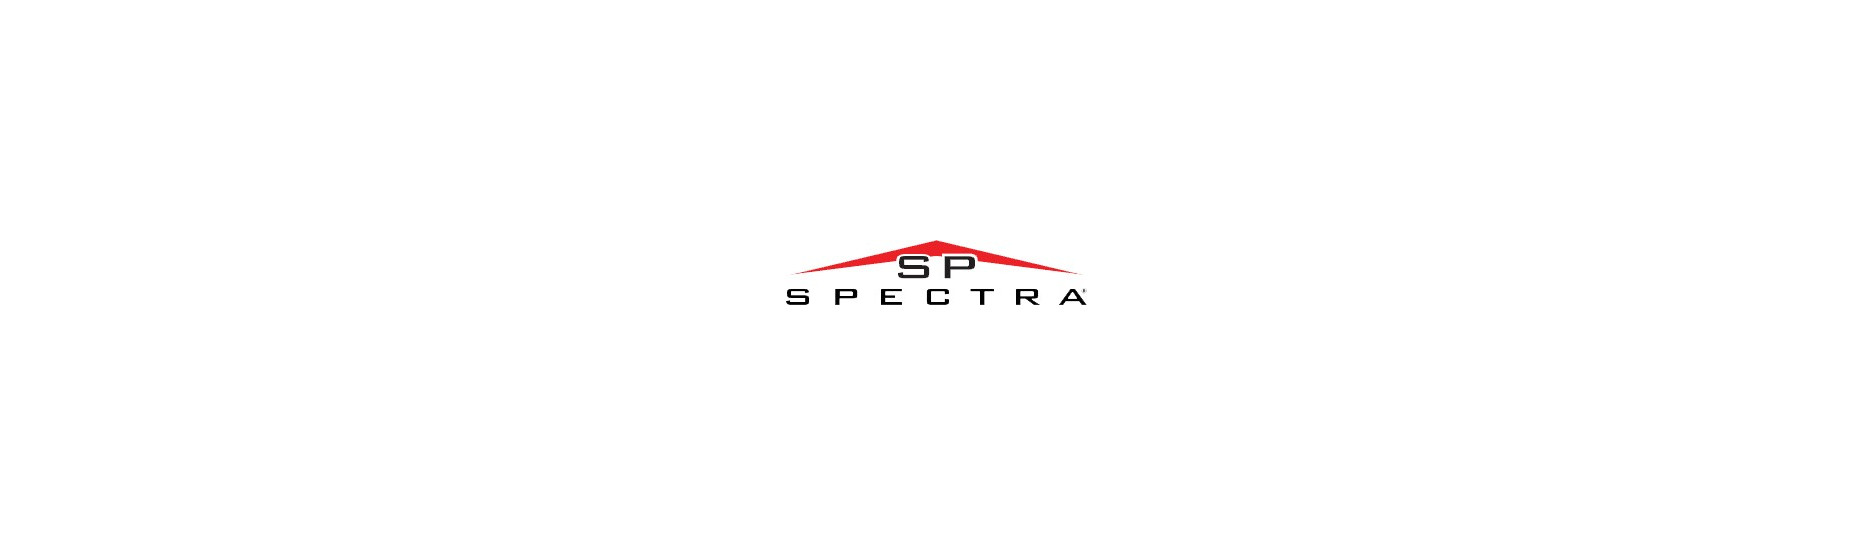 The SPECTRA paradox